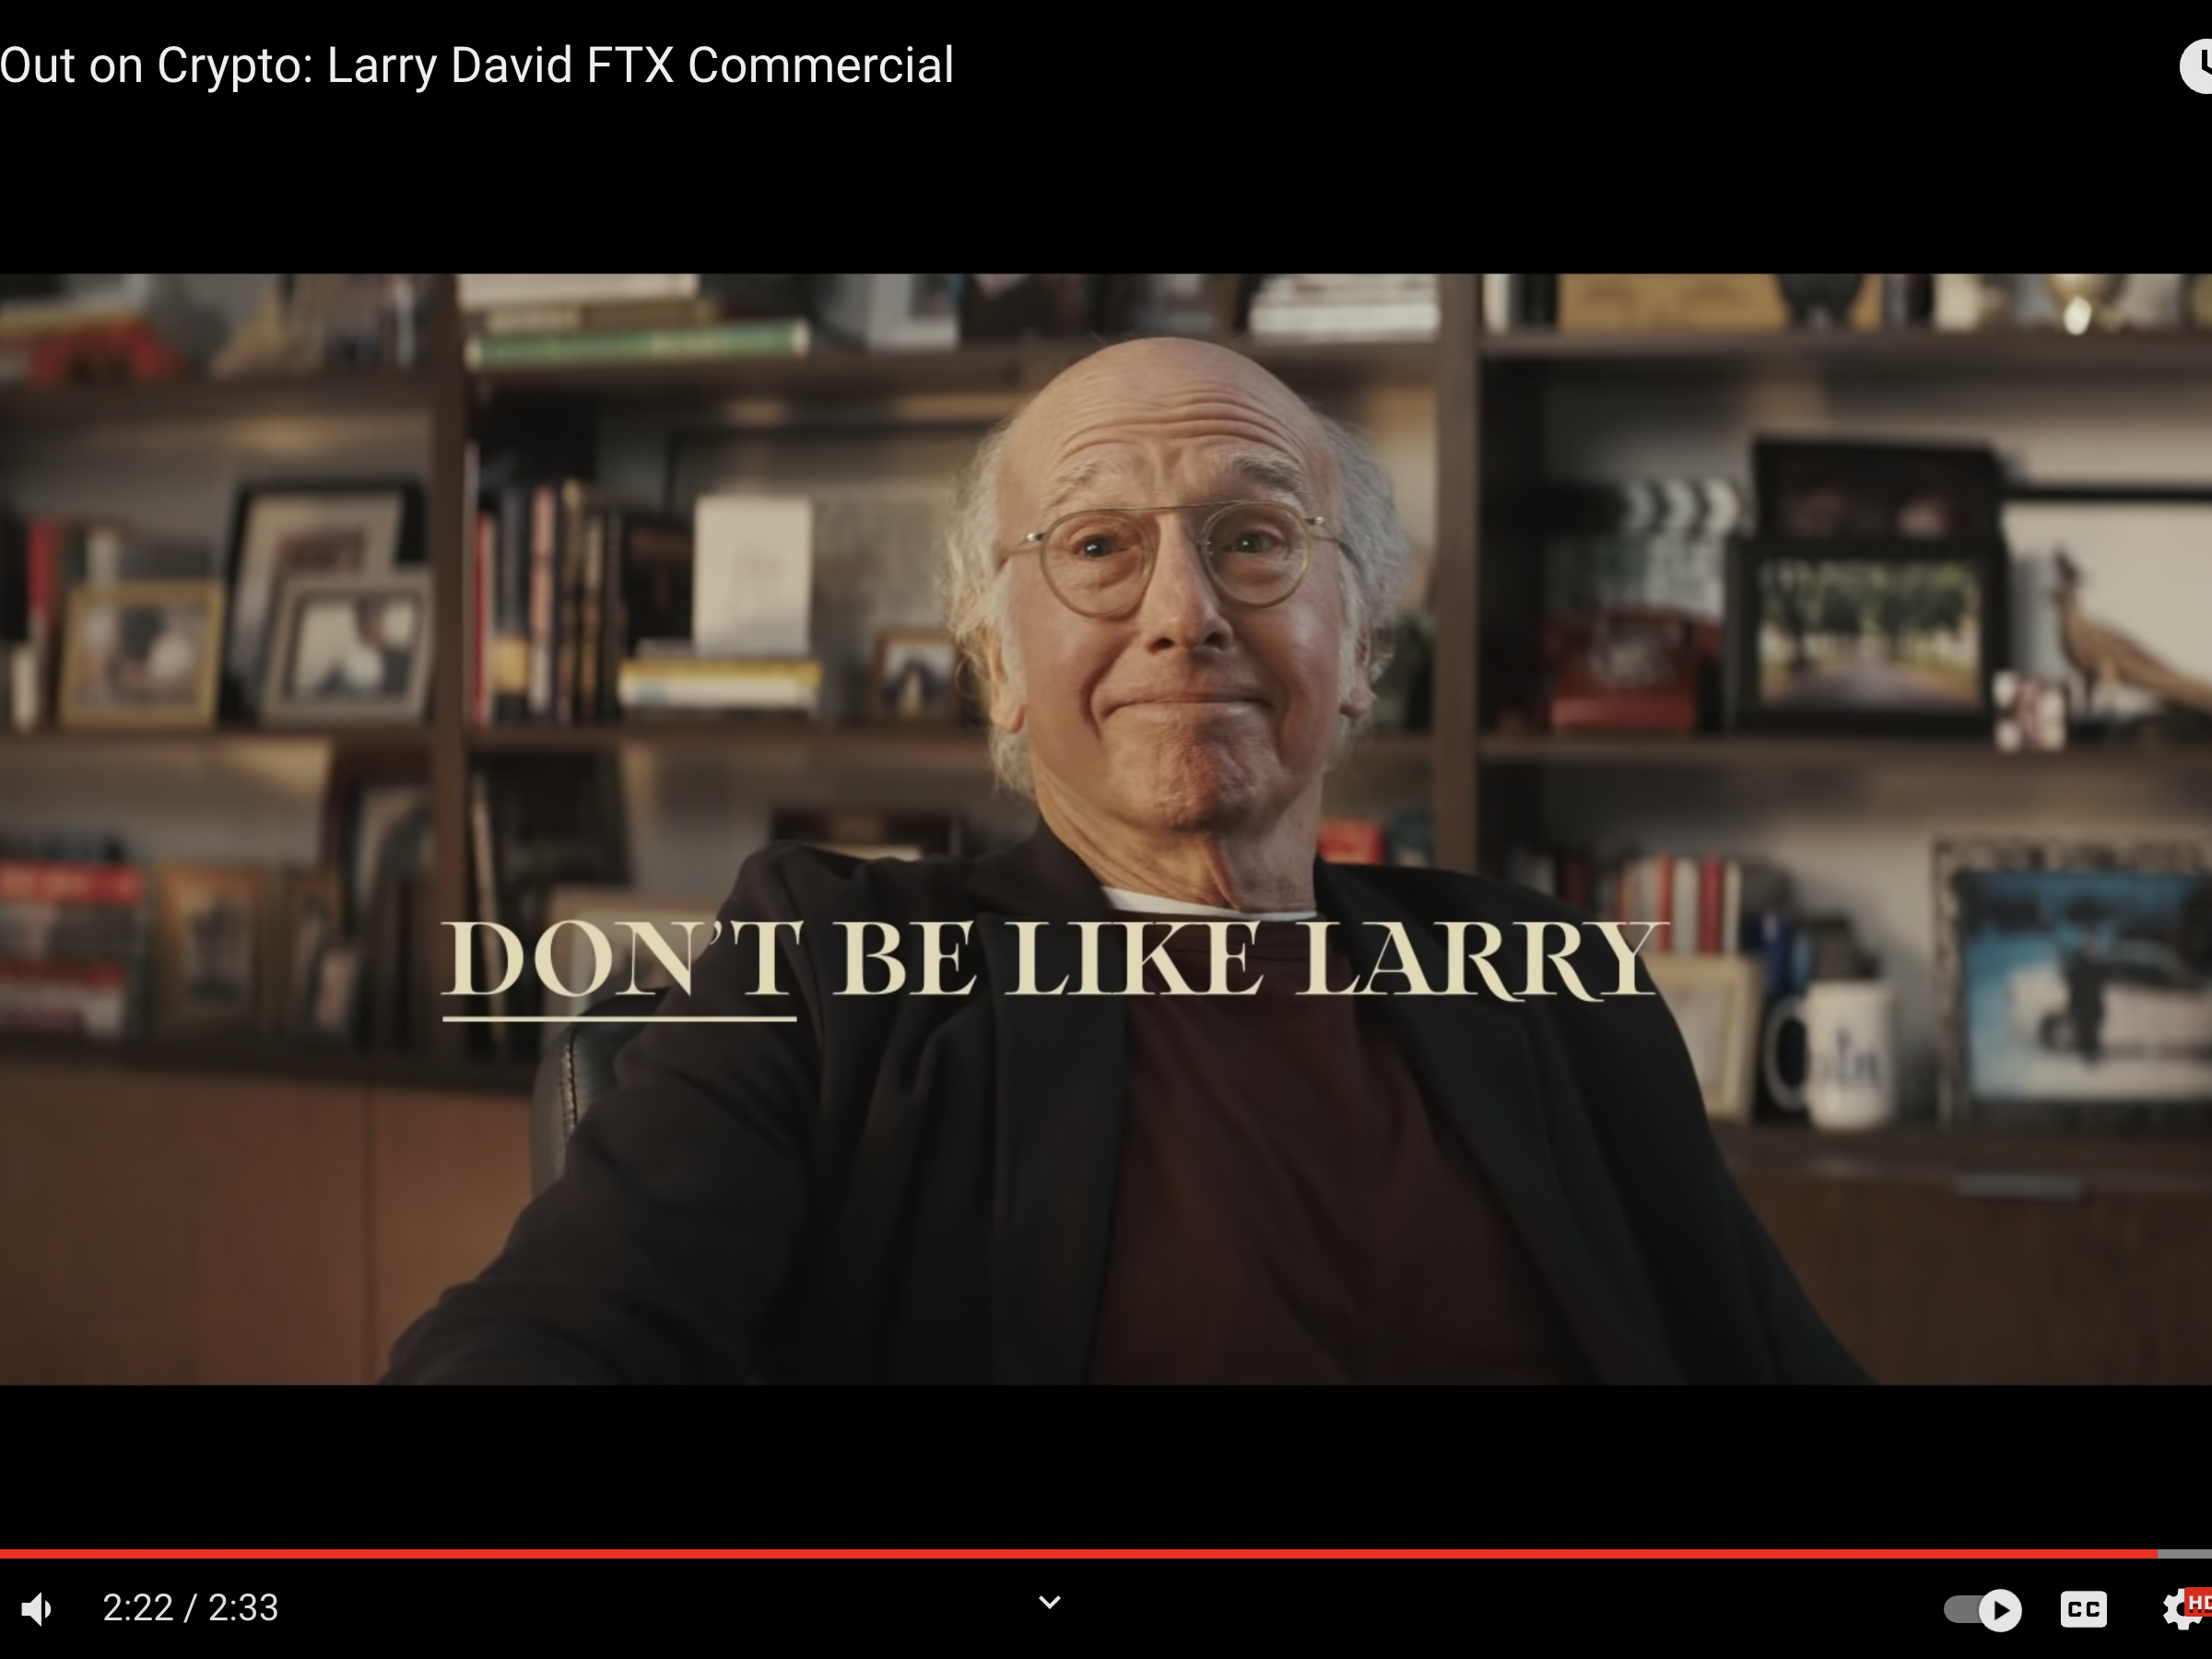 FTX commercial starring Larry David